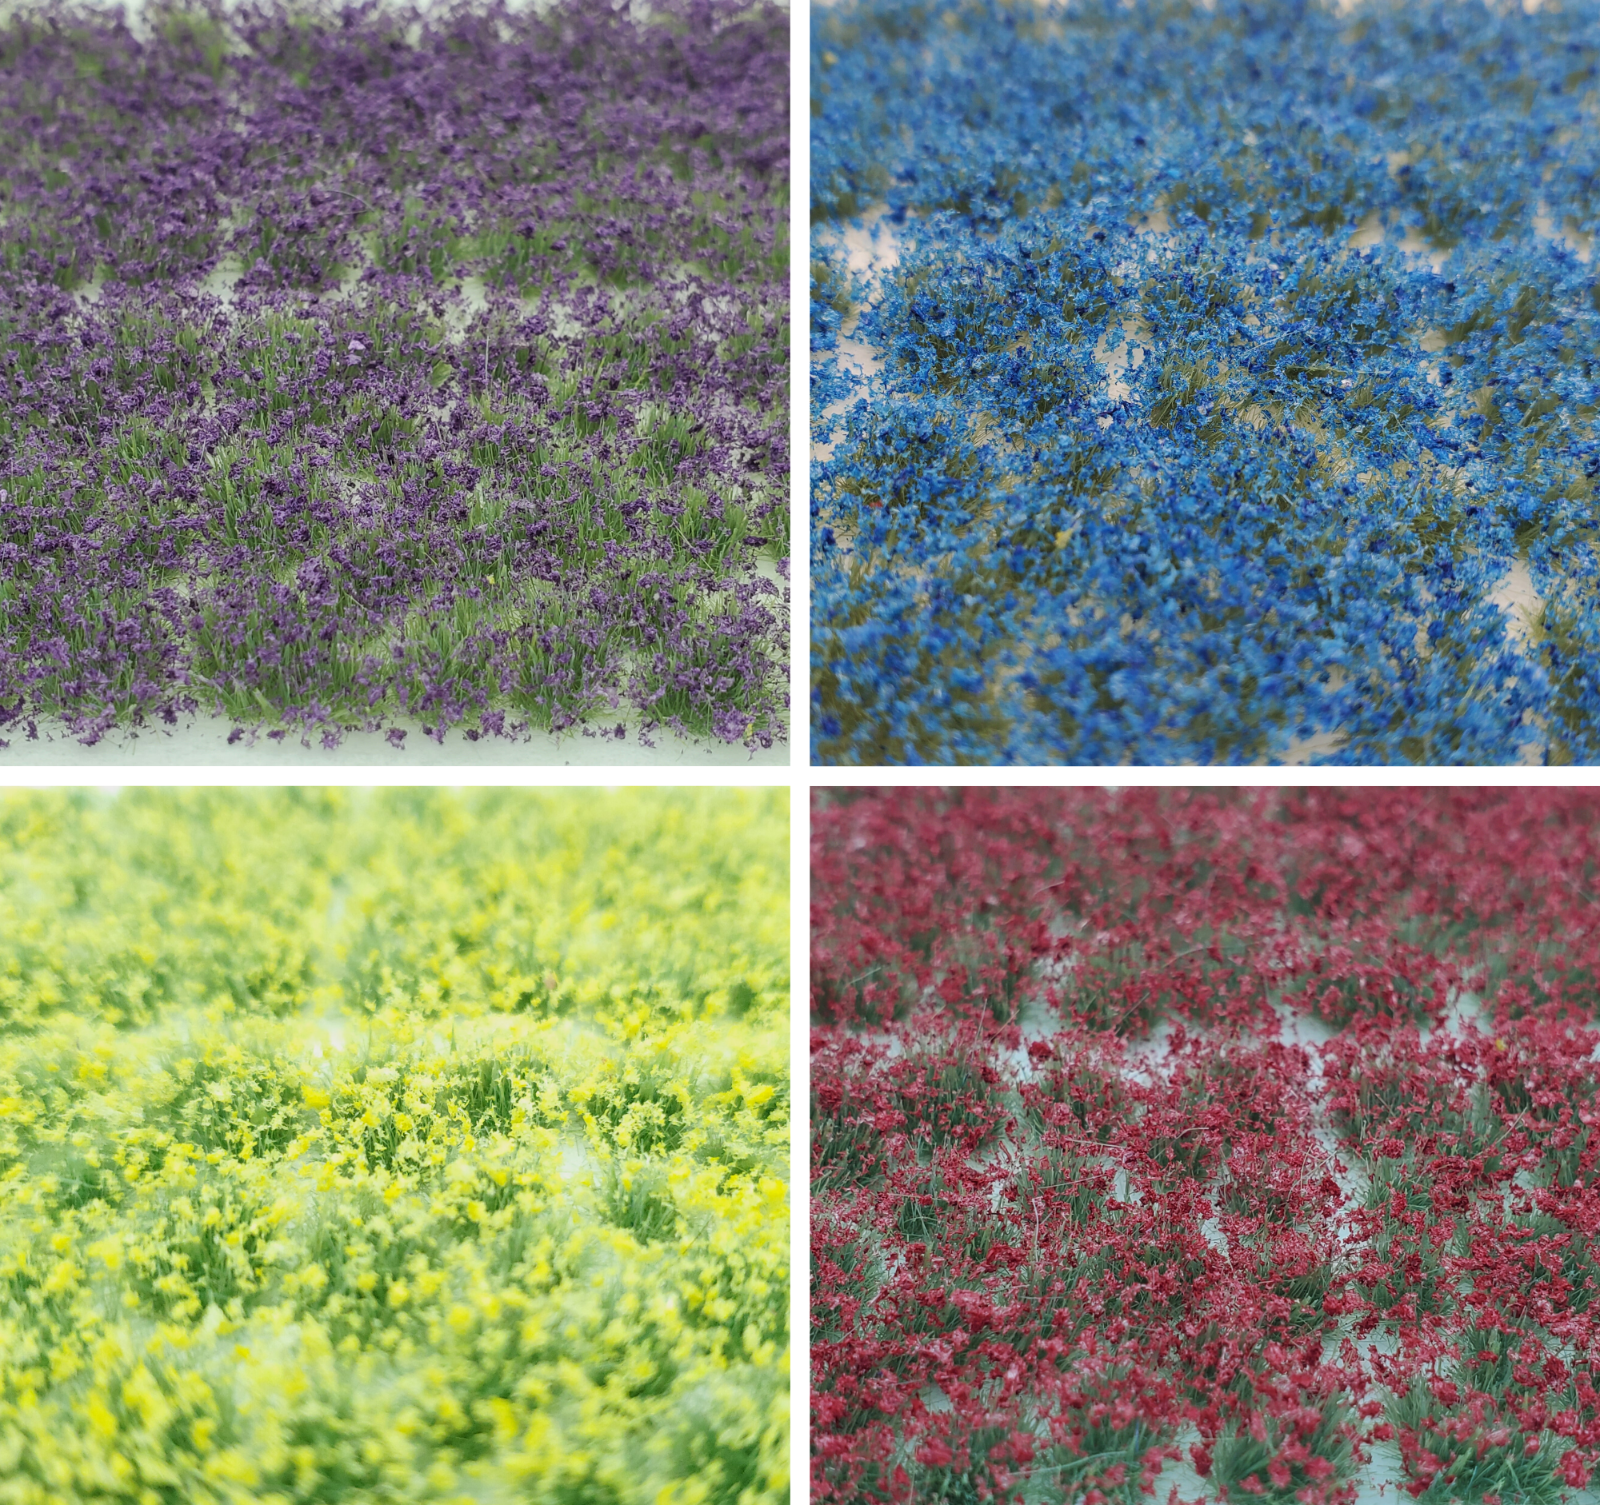 Self Adhesive Static Grass Tufts For Miniature Scenery -mix Wildflowers-4mm